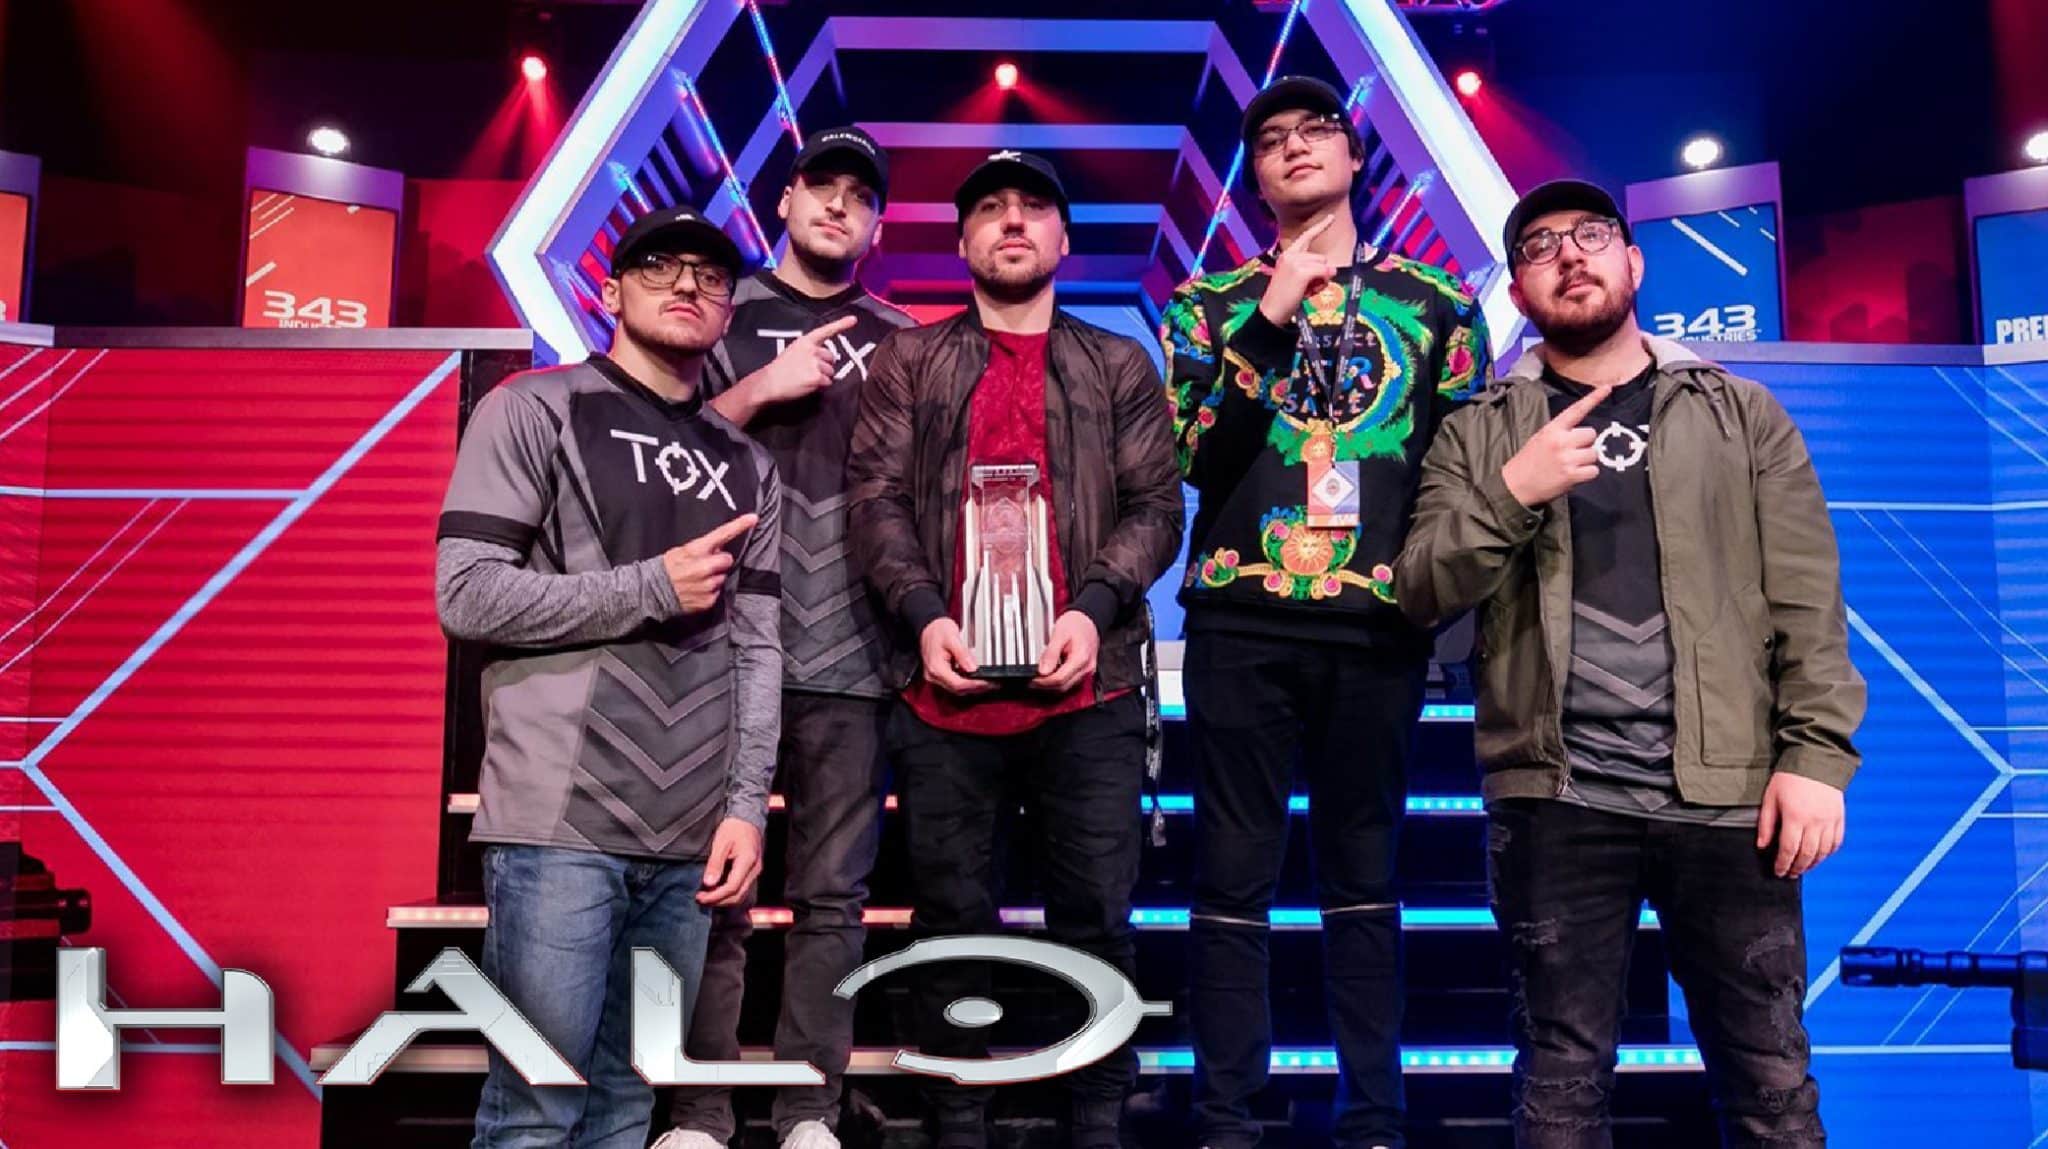 Tox Gaming on stage at Halo event